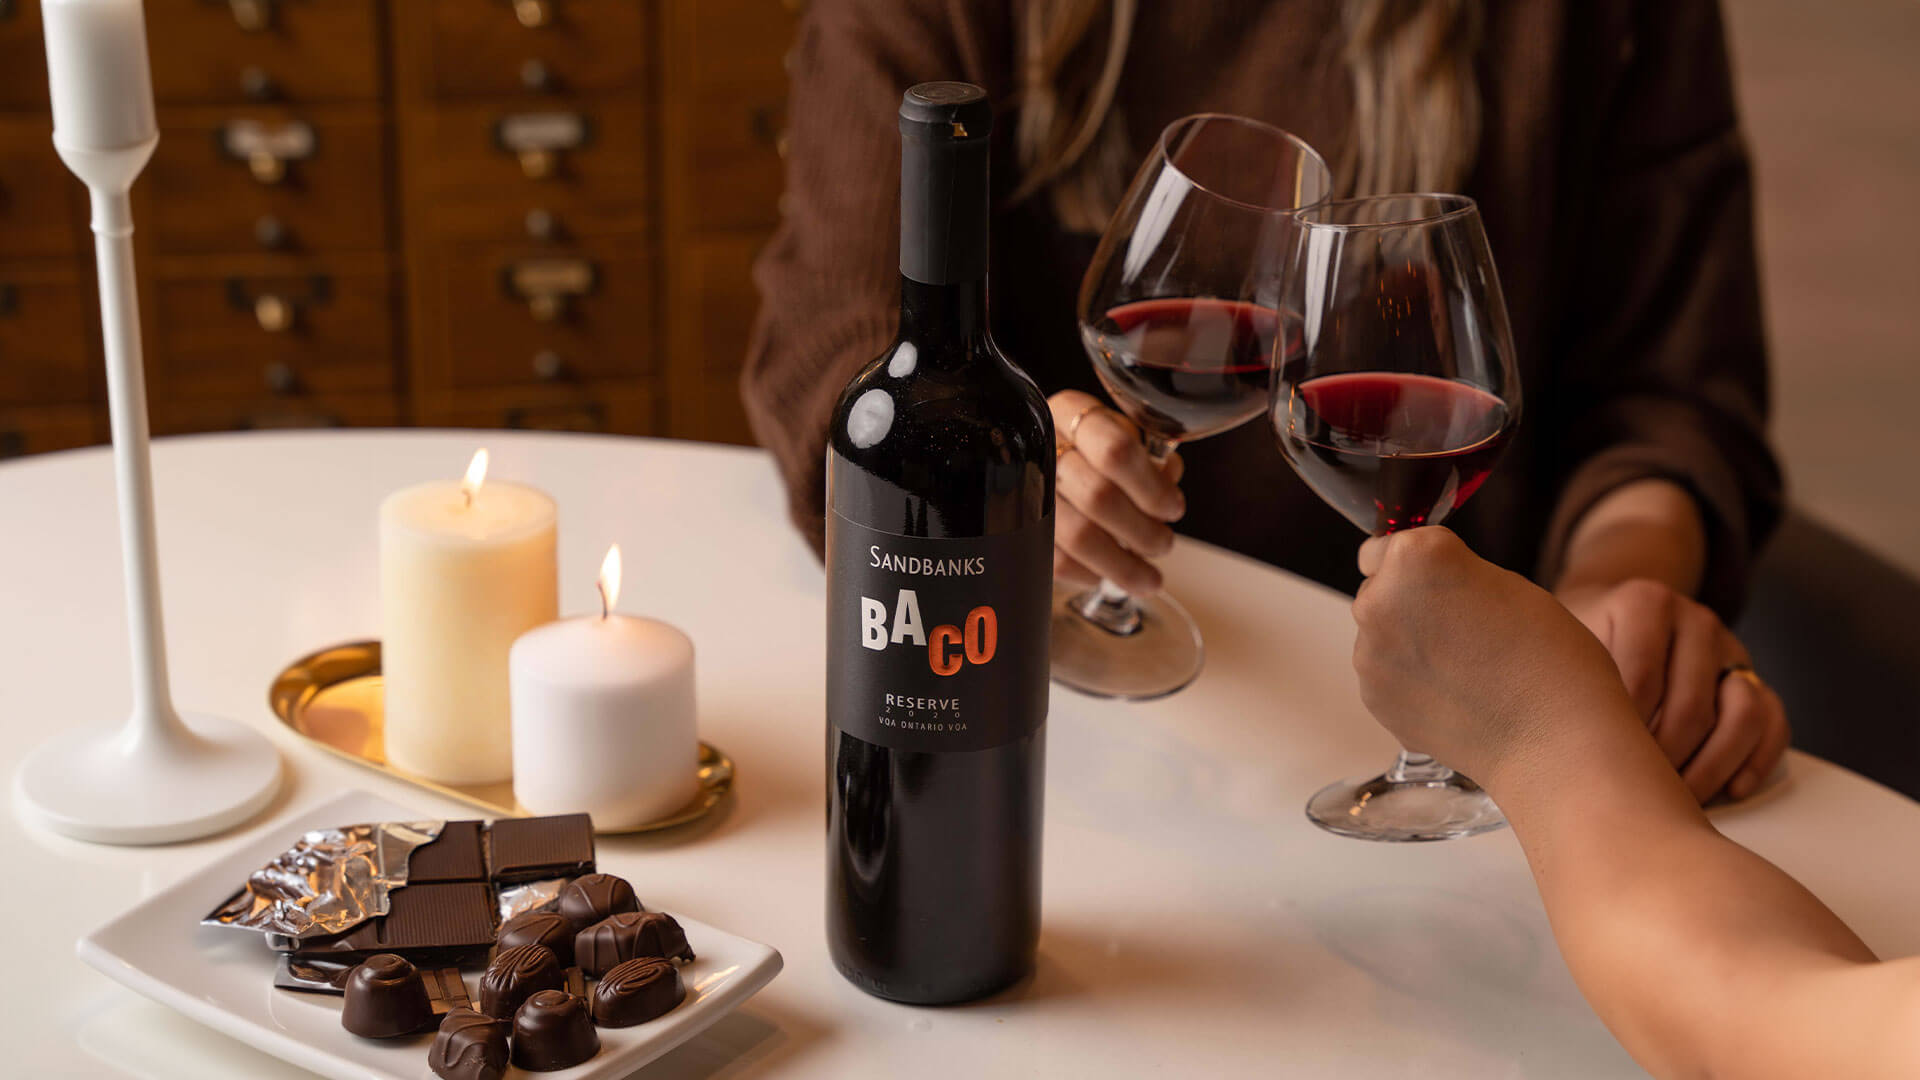 Sandbanks Baco Reserve red wine paired with a platter of chocolates.